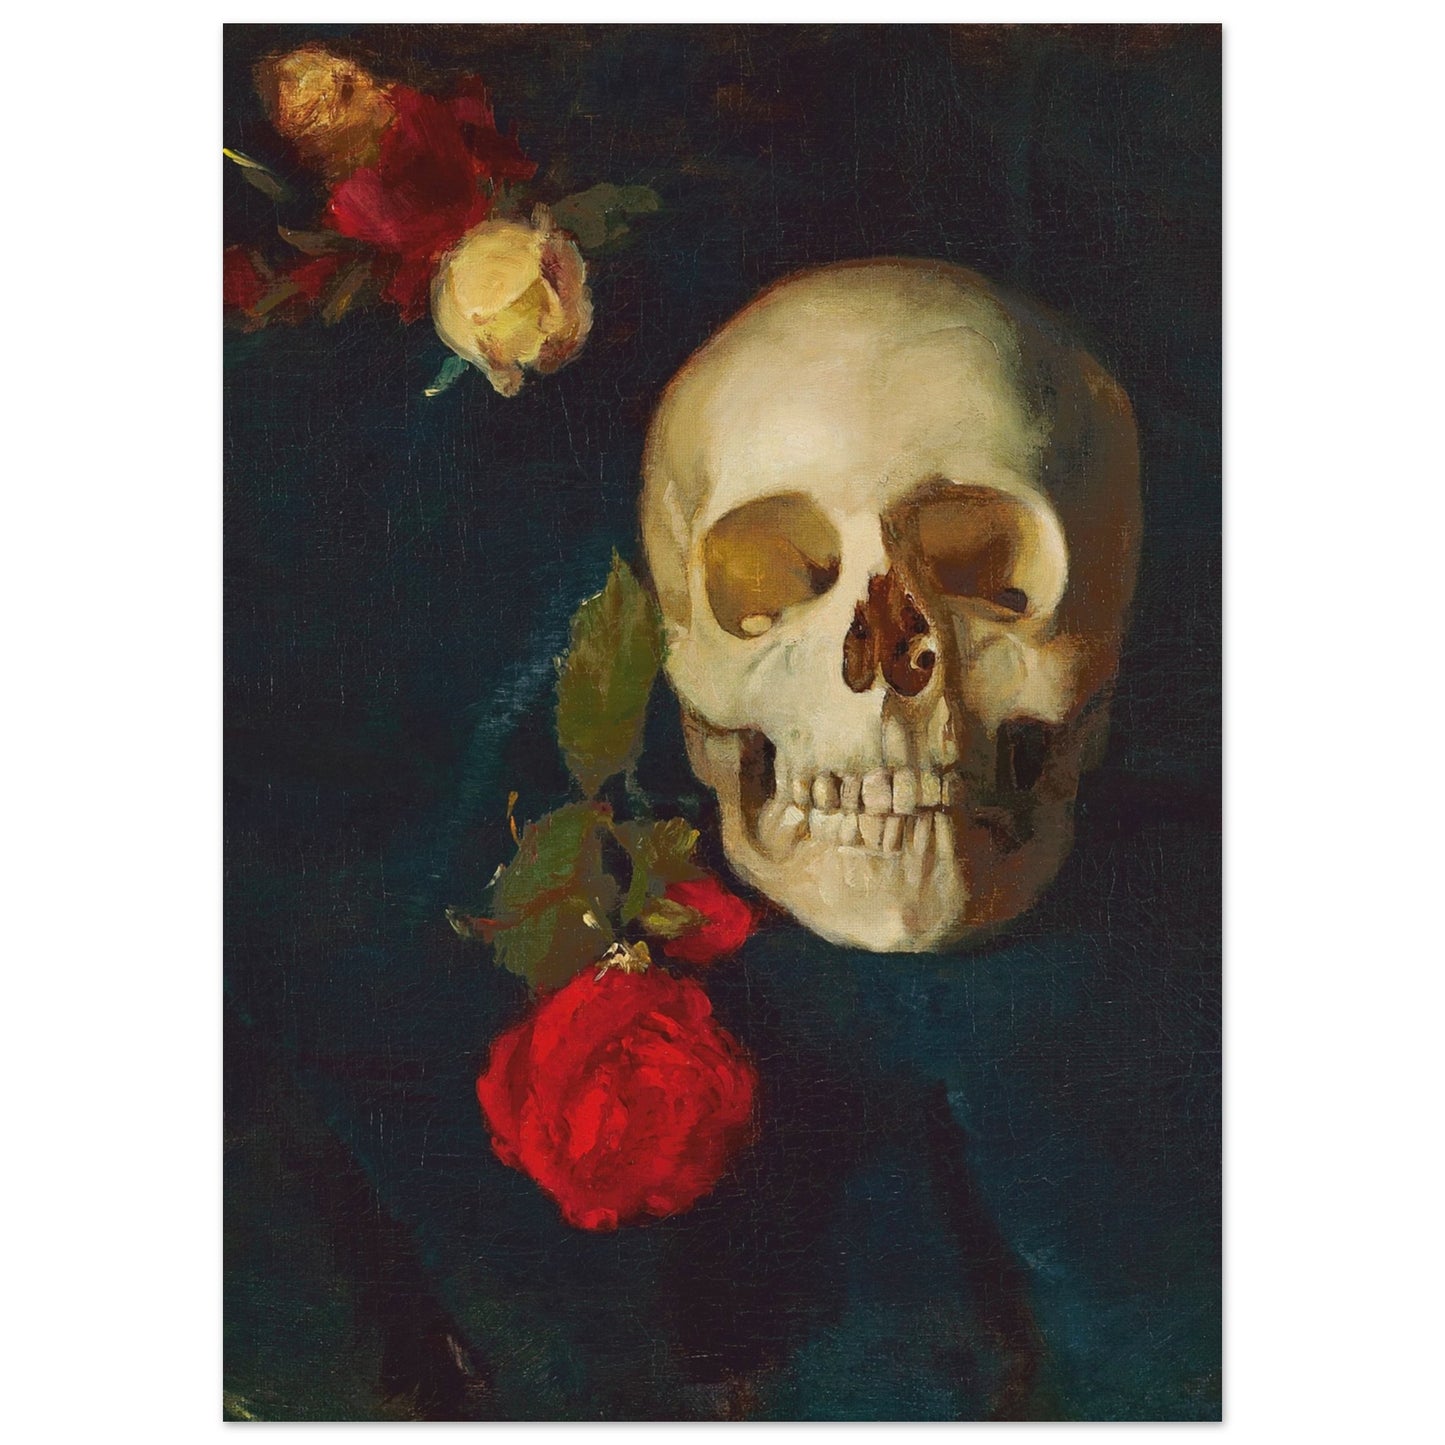 CARL SCHUCH - SKULL WITH ROSES - PREMIUM MATTE POSTER